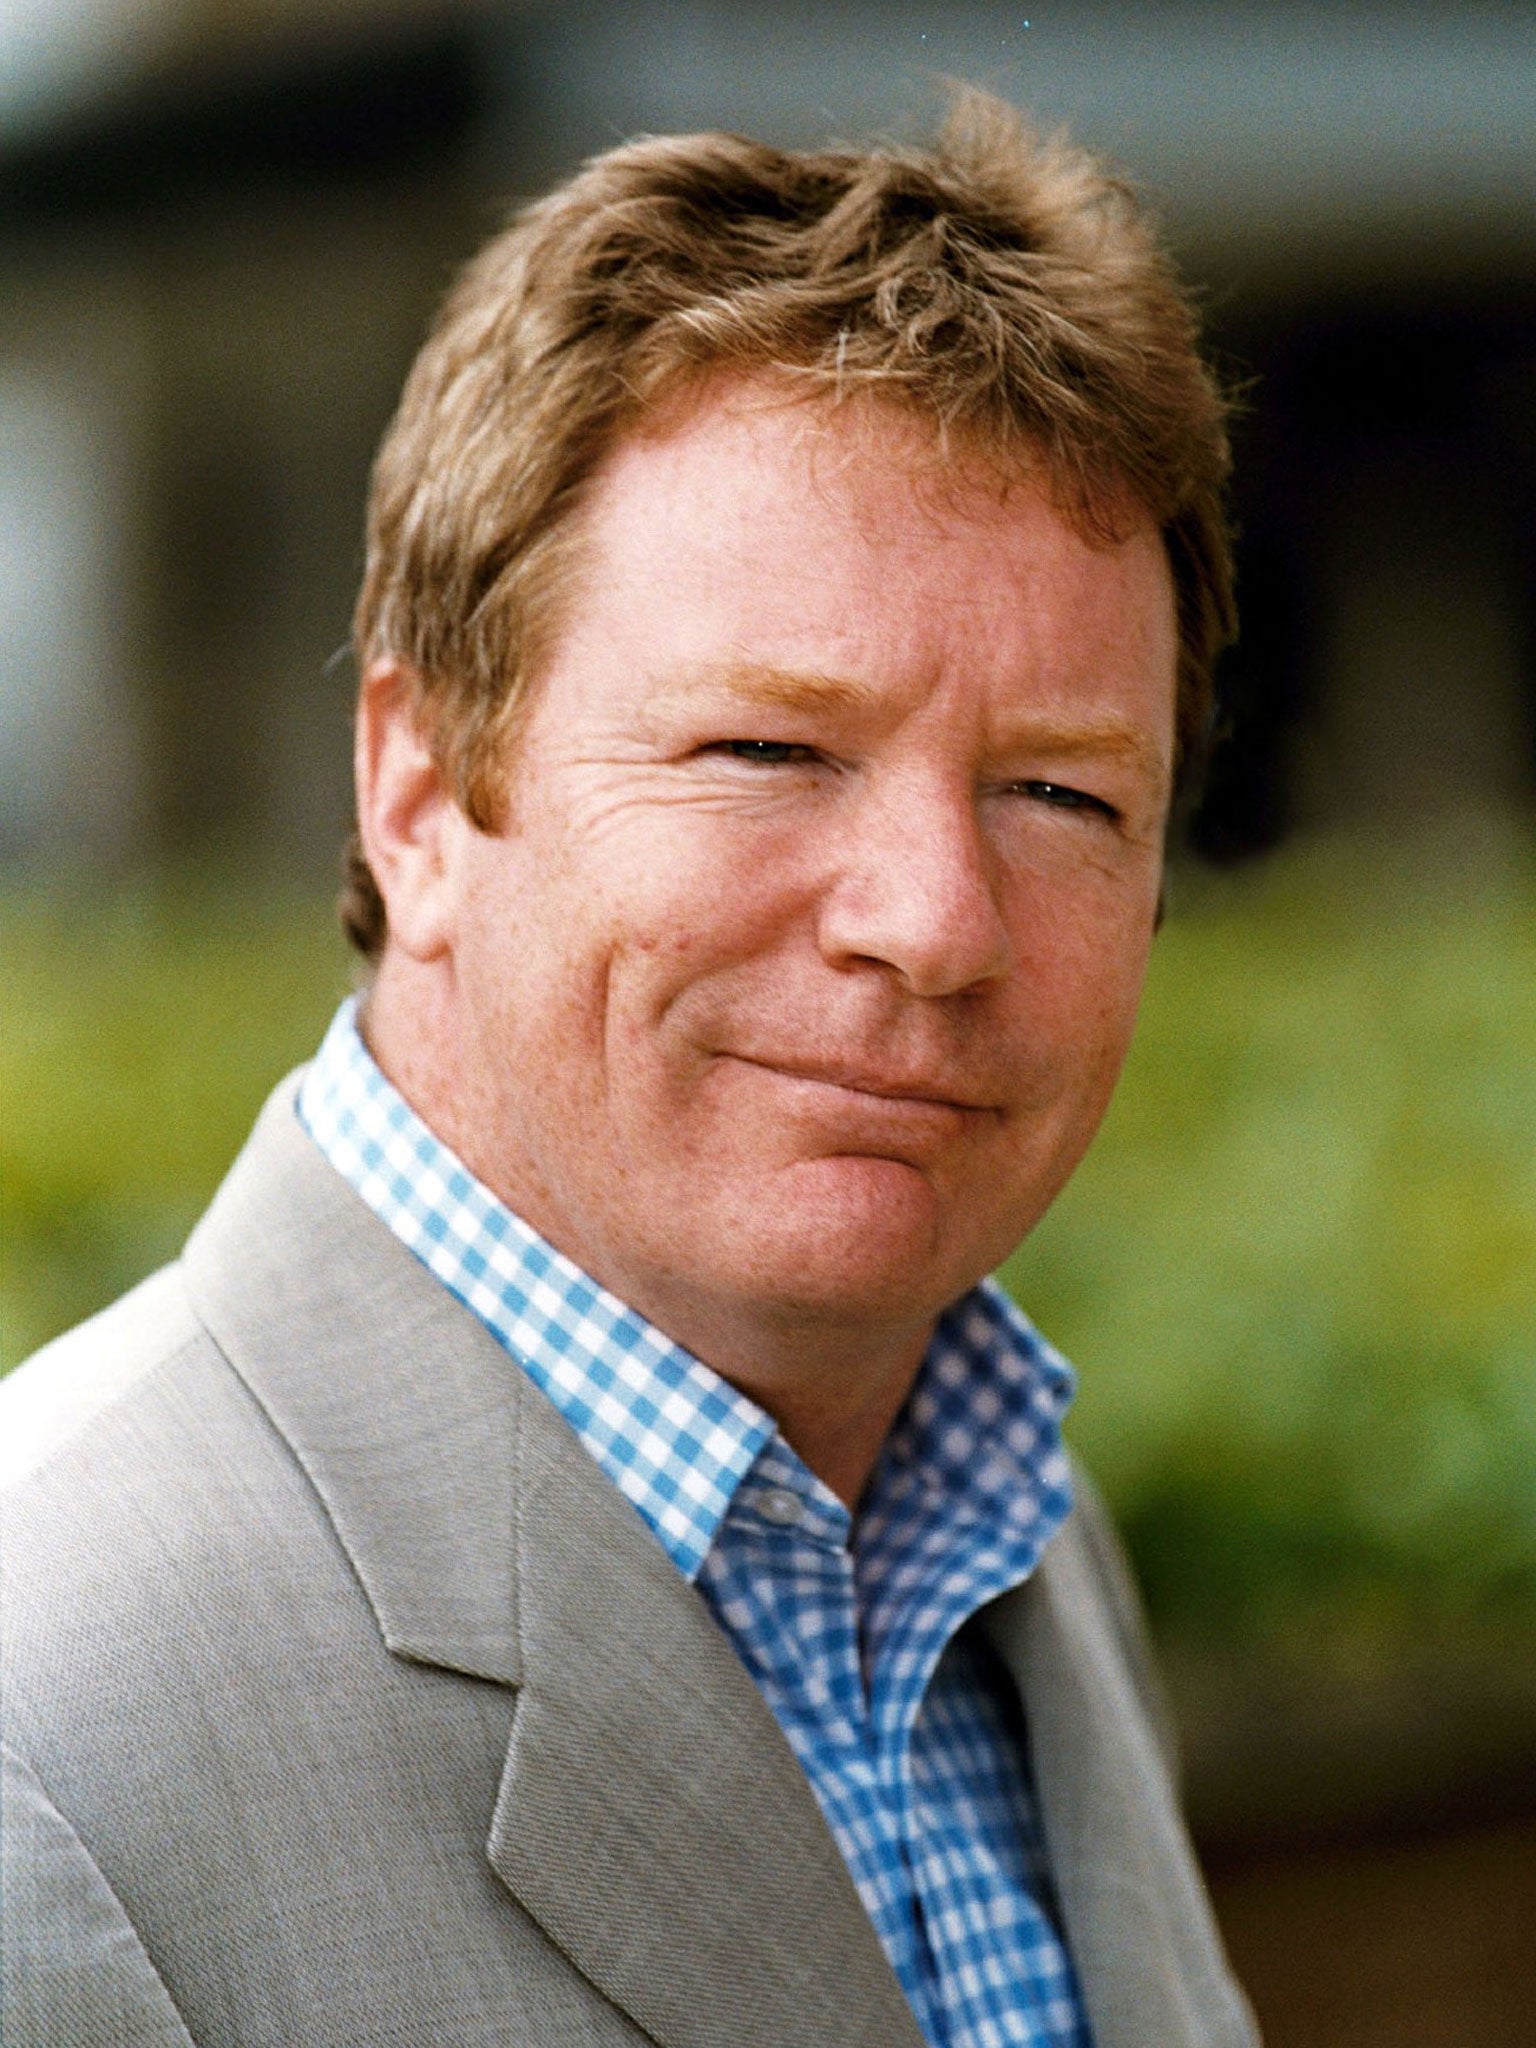 Jim Davidson has expressed relief after he was told he will not be charged with any sexual offence